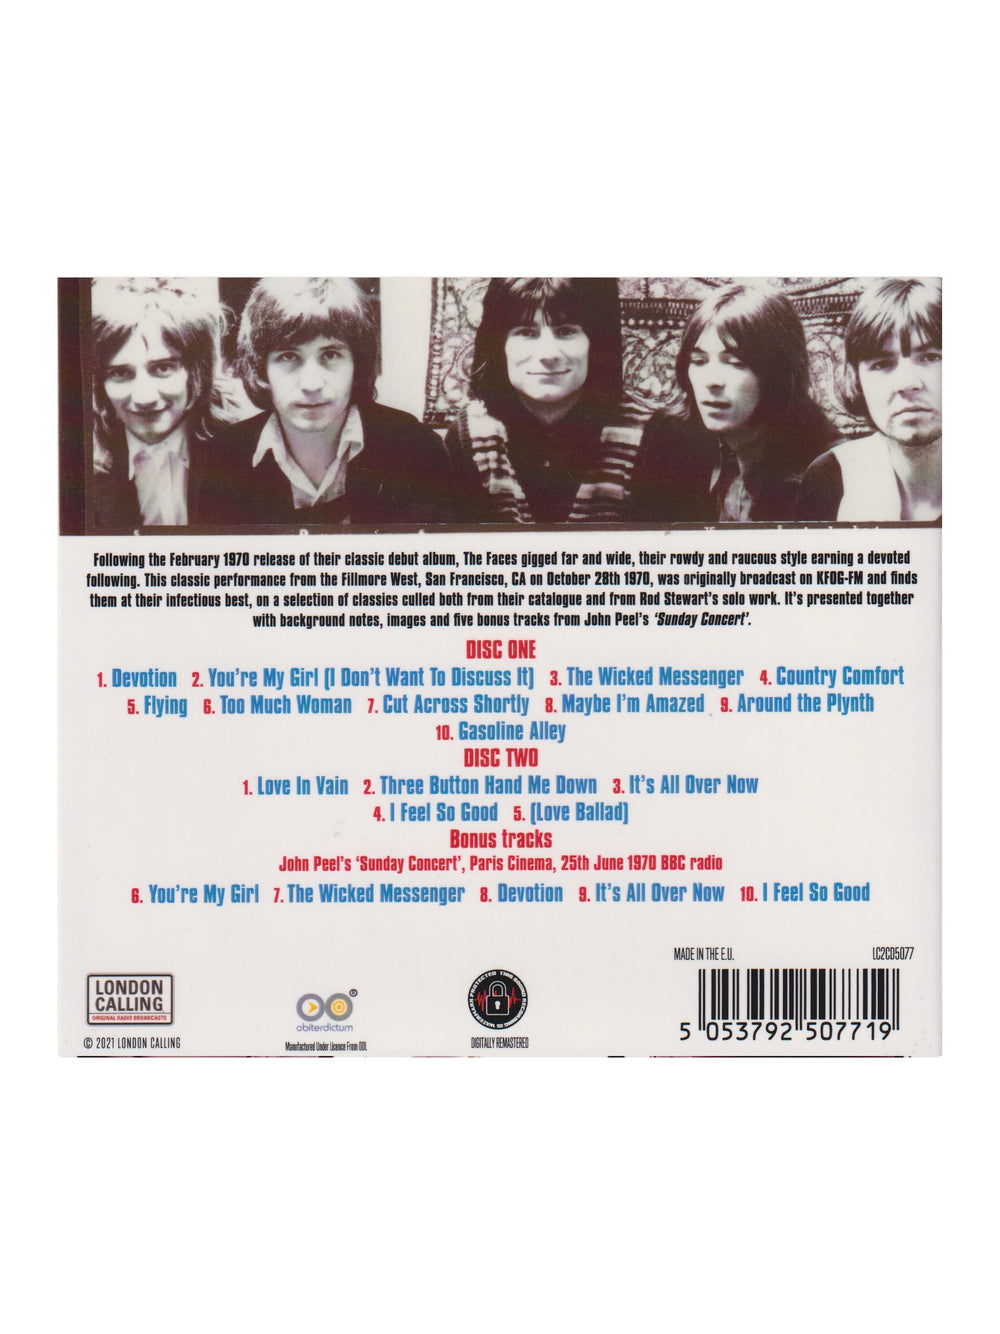 Rod Stewart And The Faces – Live At The Fillmore 1970 2CD Set